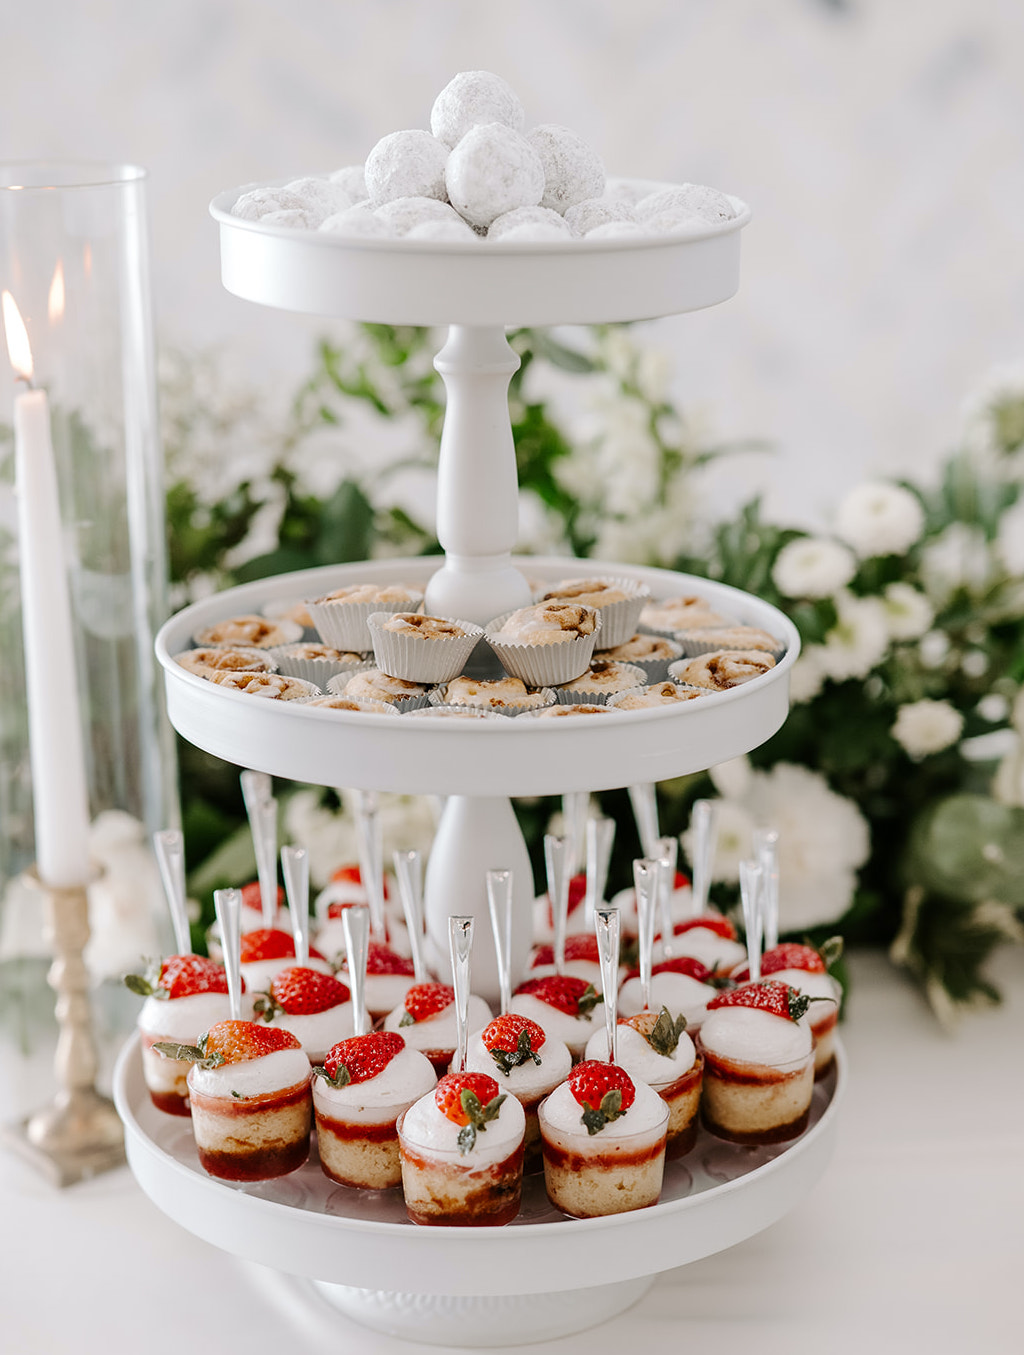 A dessert tray is full of yummy desserts with powdered sugar, strawberries and mini baked goods.